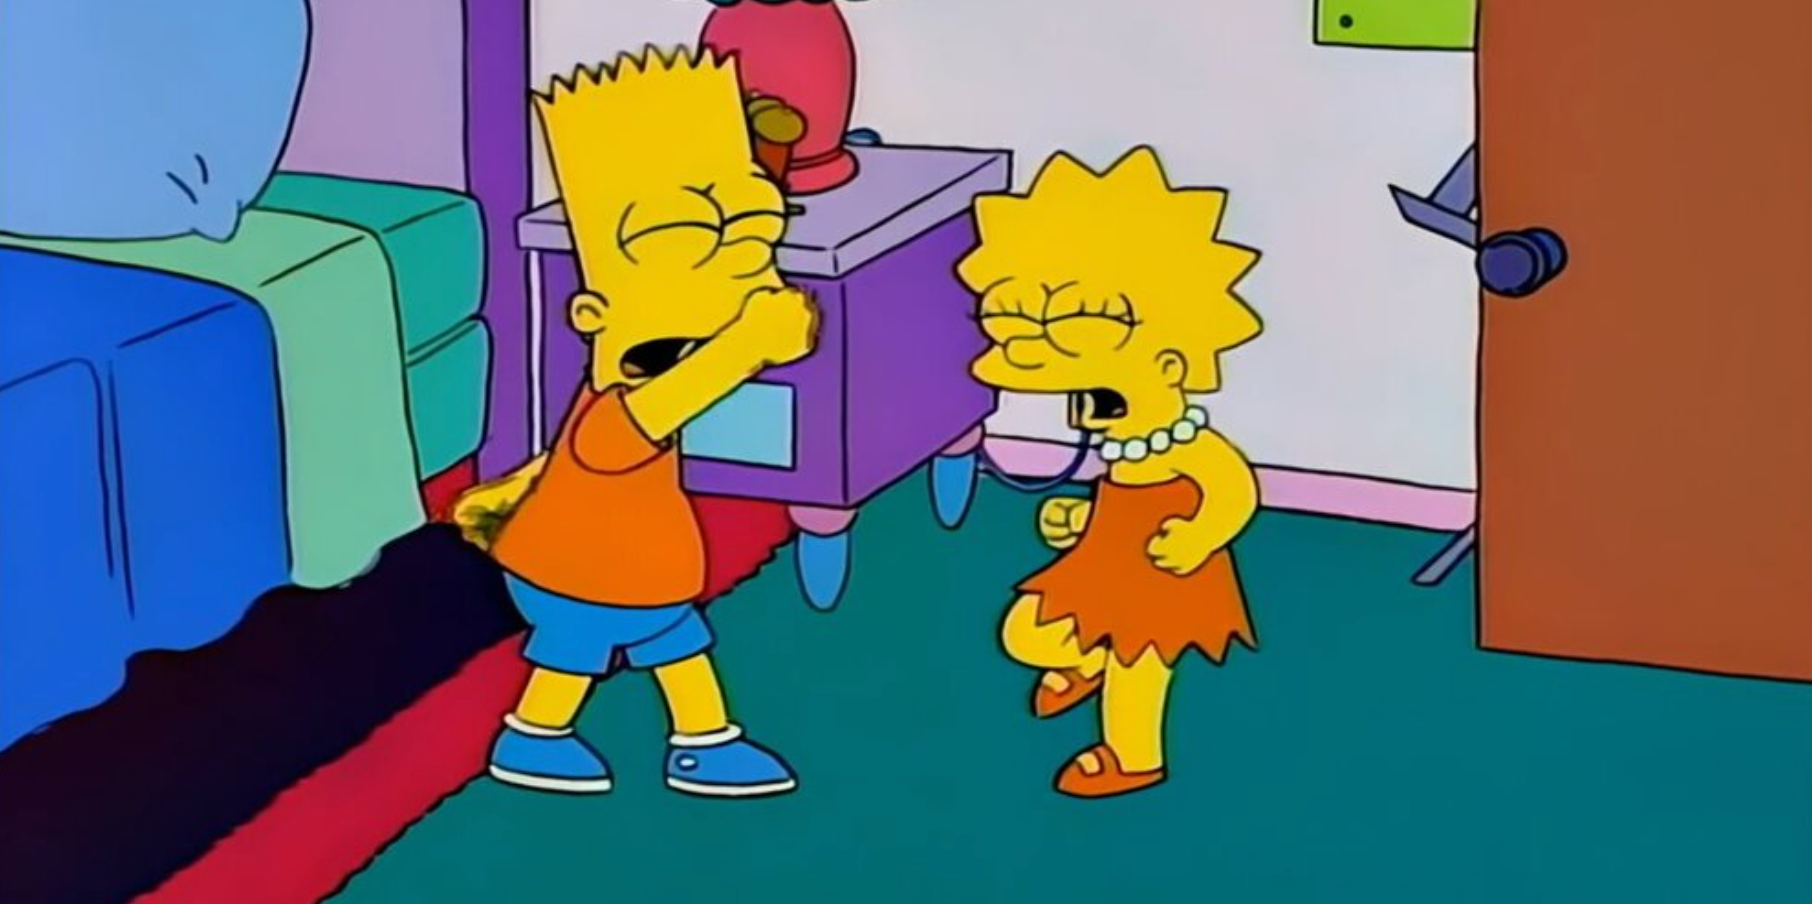 Bart and Lisa pretending to fight in the Simpsons